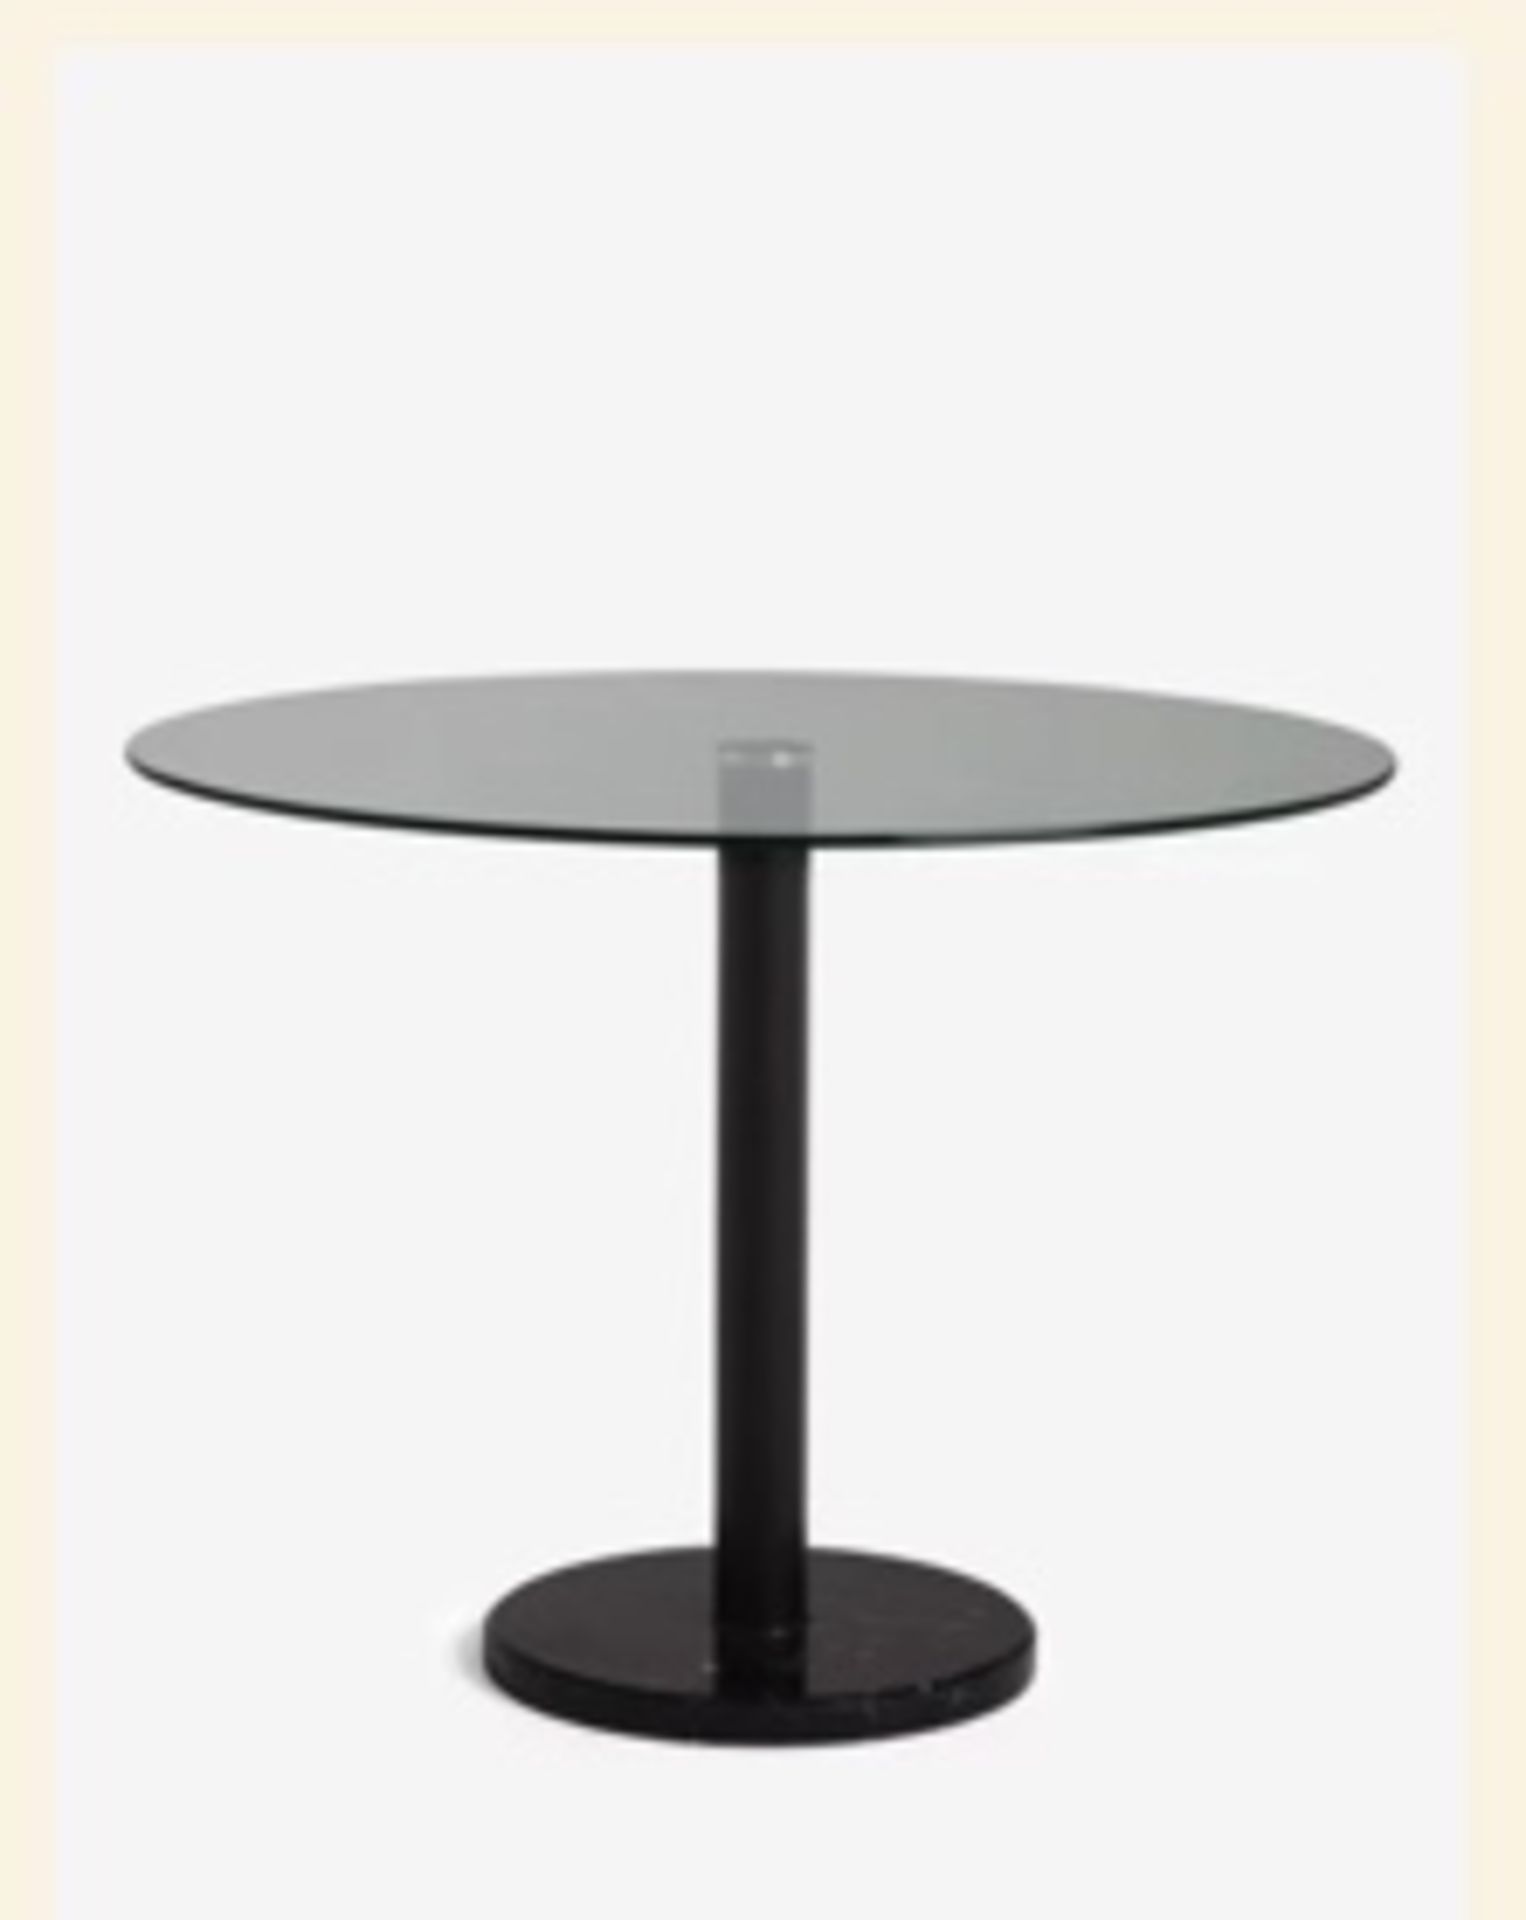 John Lewis ANYDAY Enzo 4 Seater Glass Round Dining Table, Black Marble RRP £199